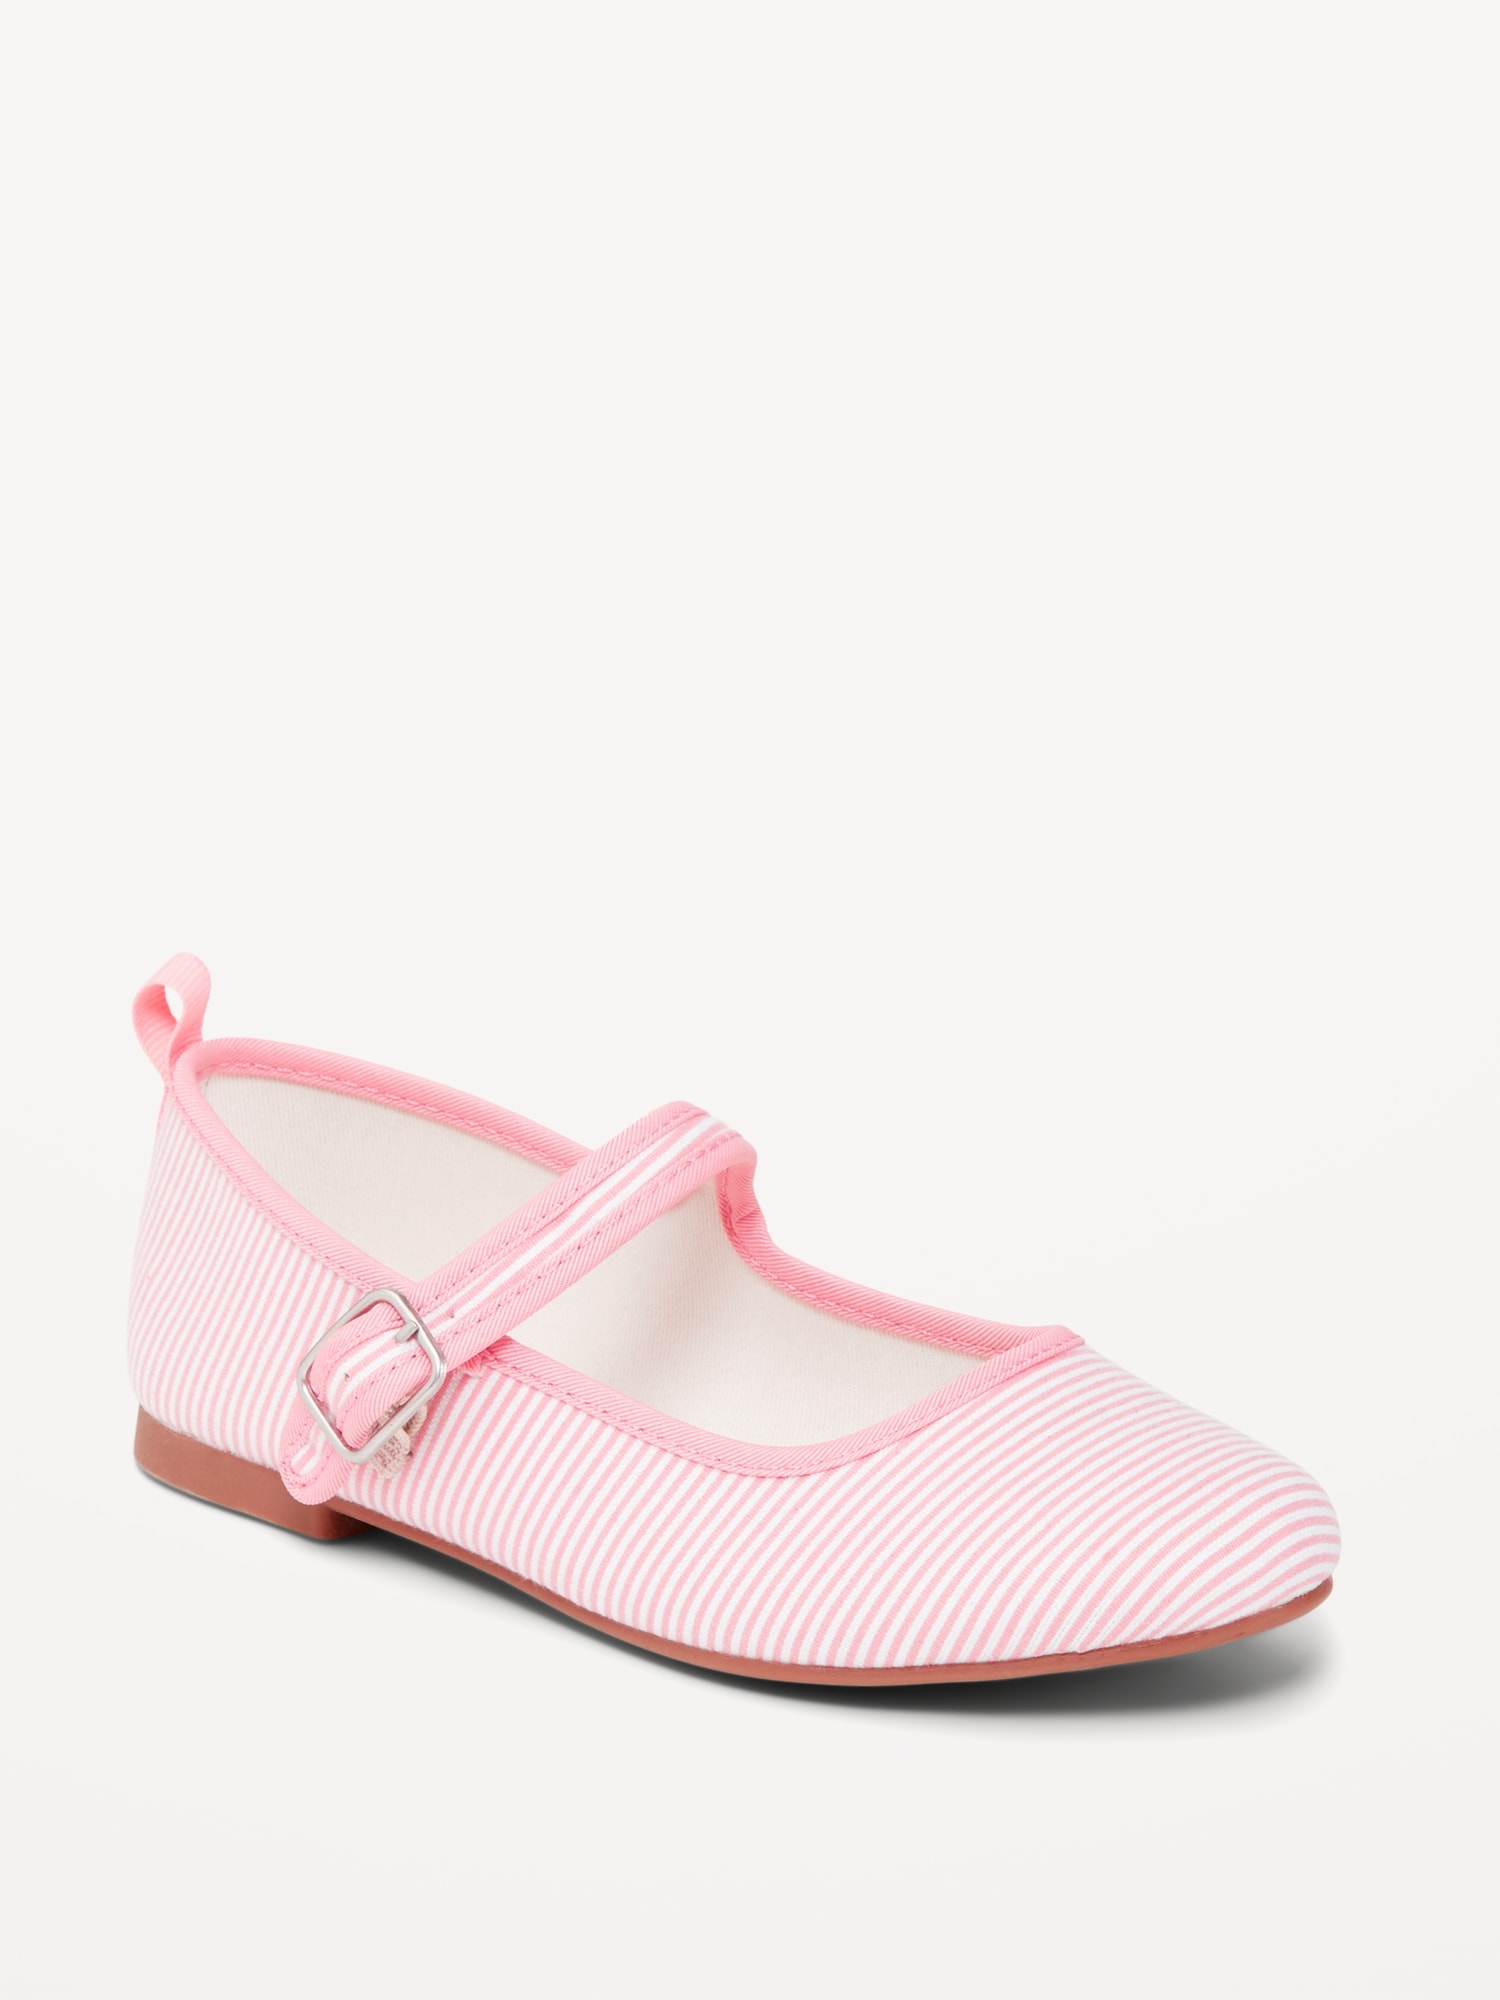 Striped Canvas Ballet Flat Shoes for Girls